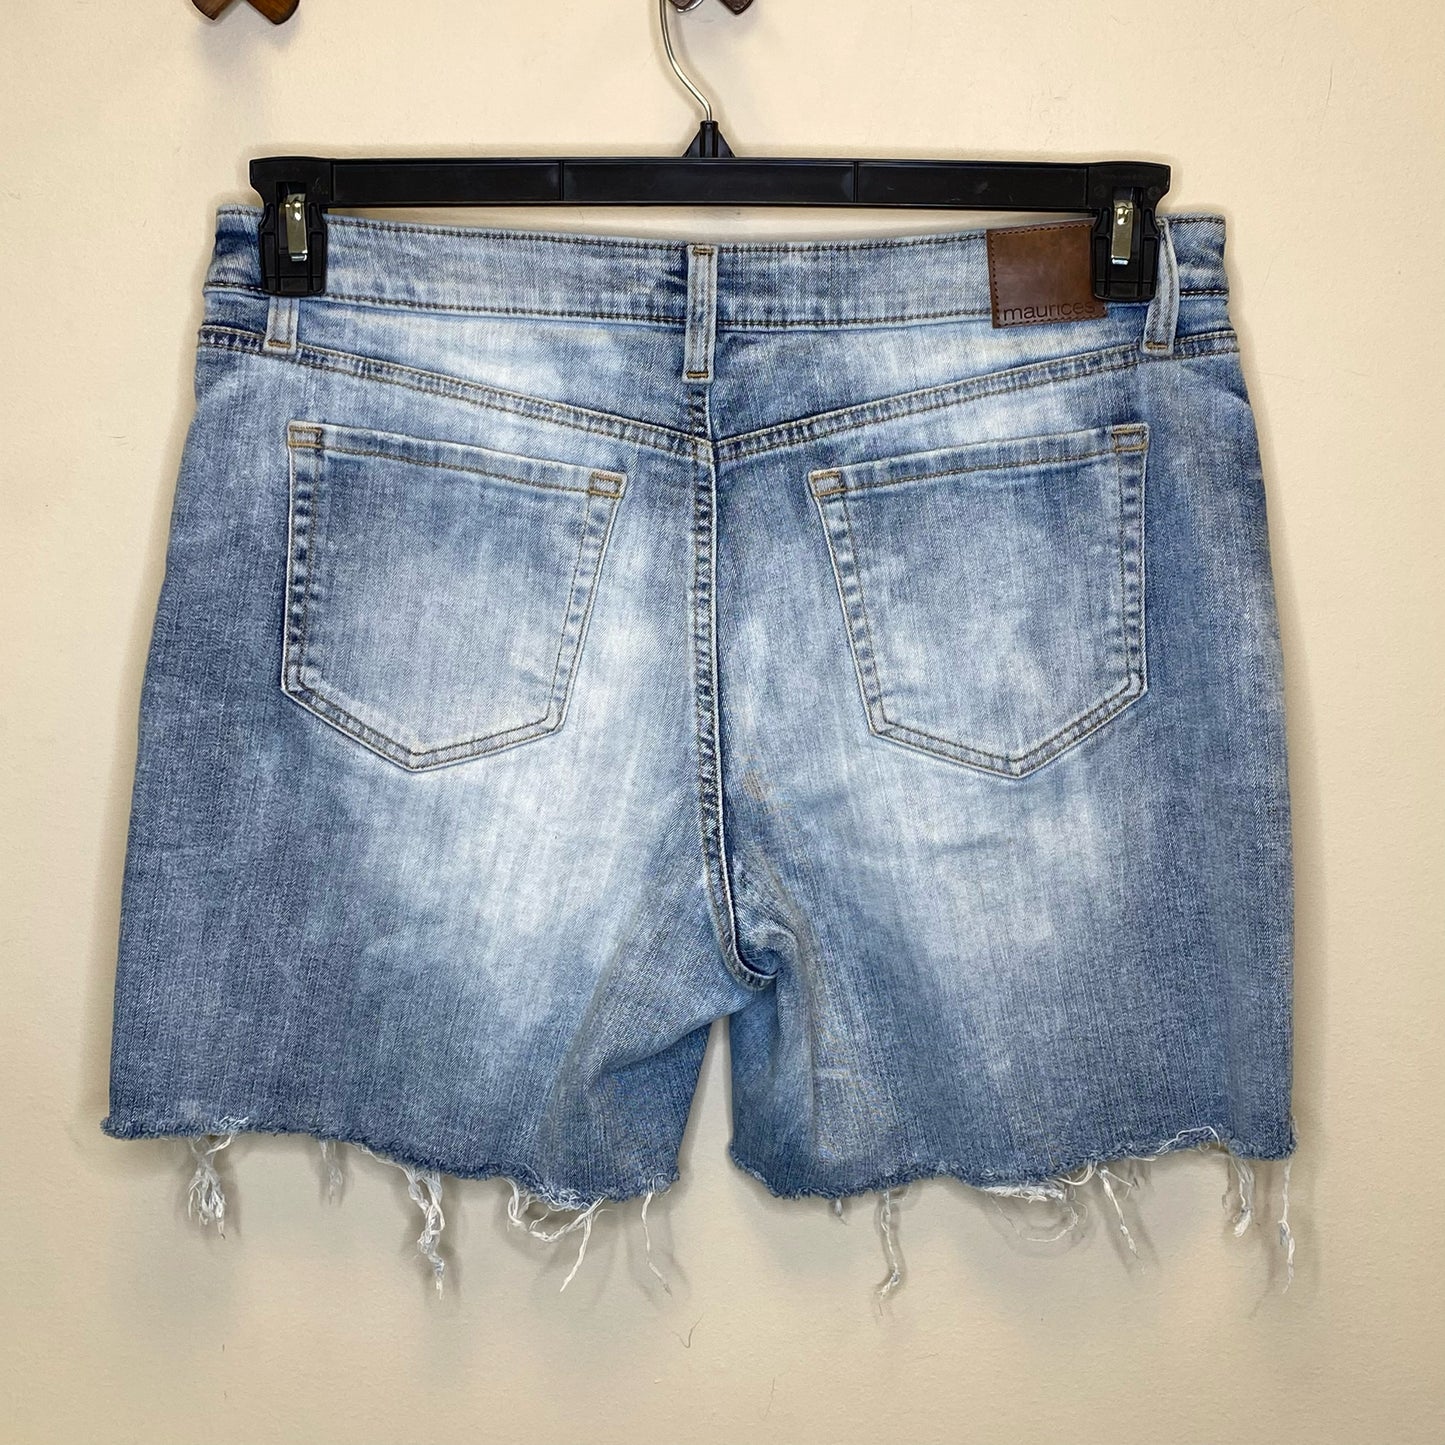 Maurices Mid-Rise Shorts - Size 14